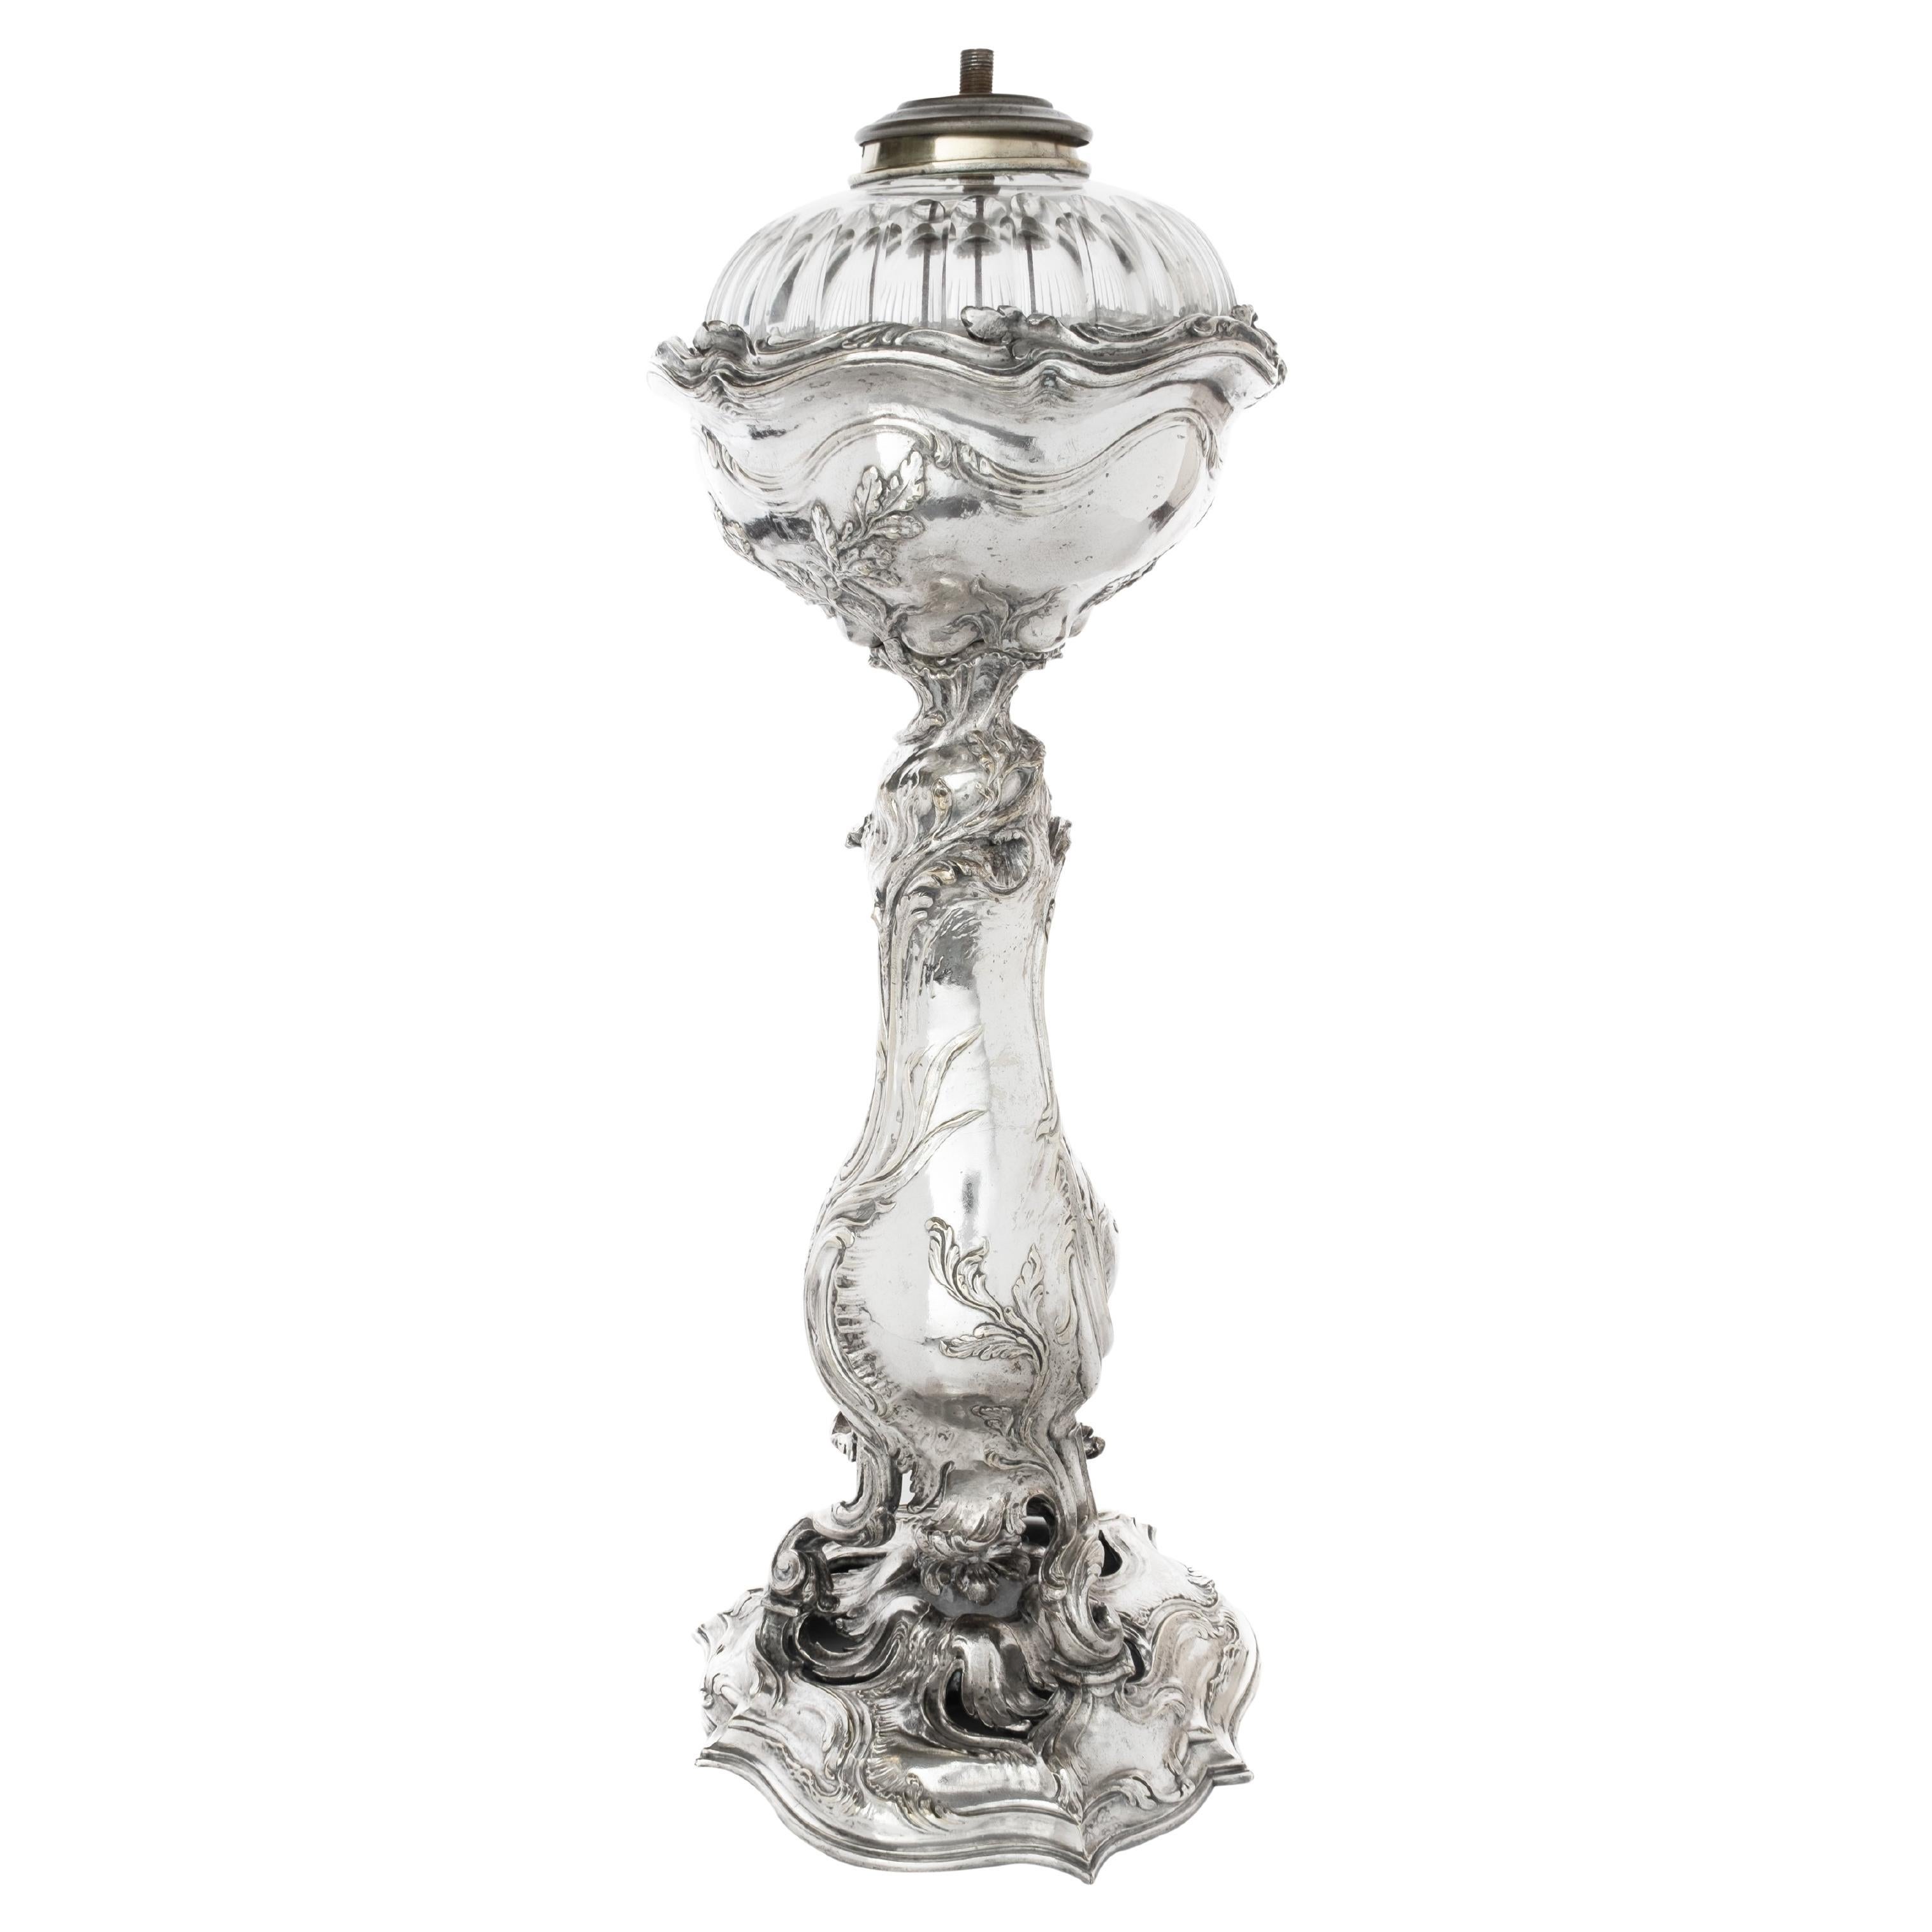 Exceptional Silvered Bronze and Cut Crystal Banquet Lamp, 19th century